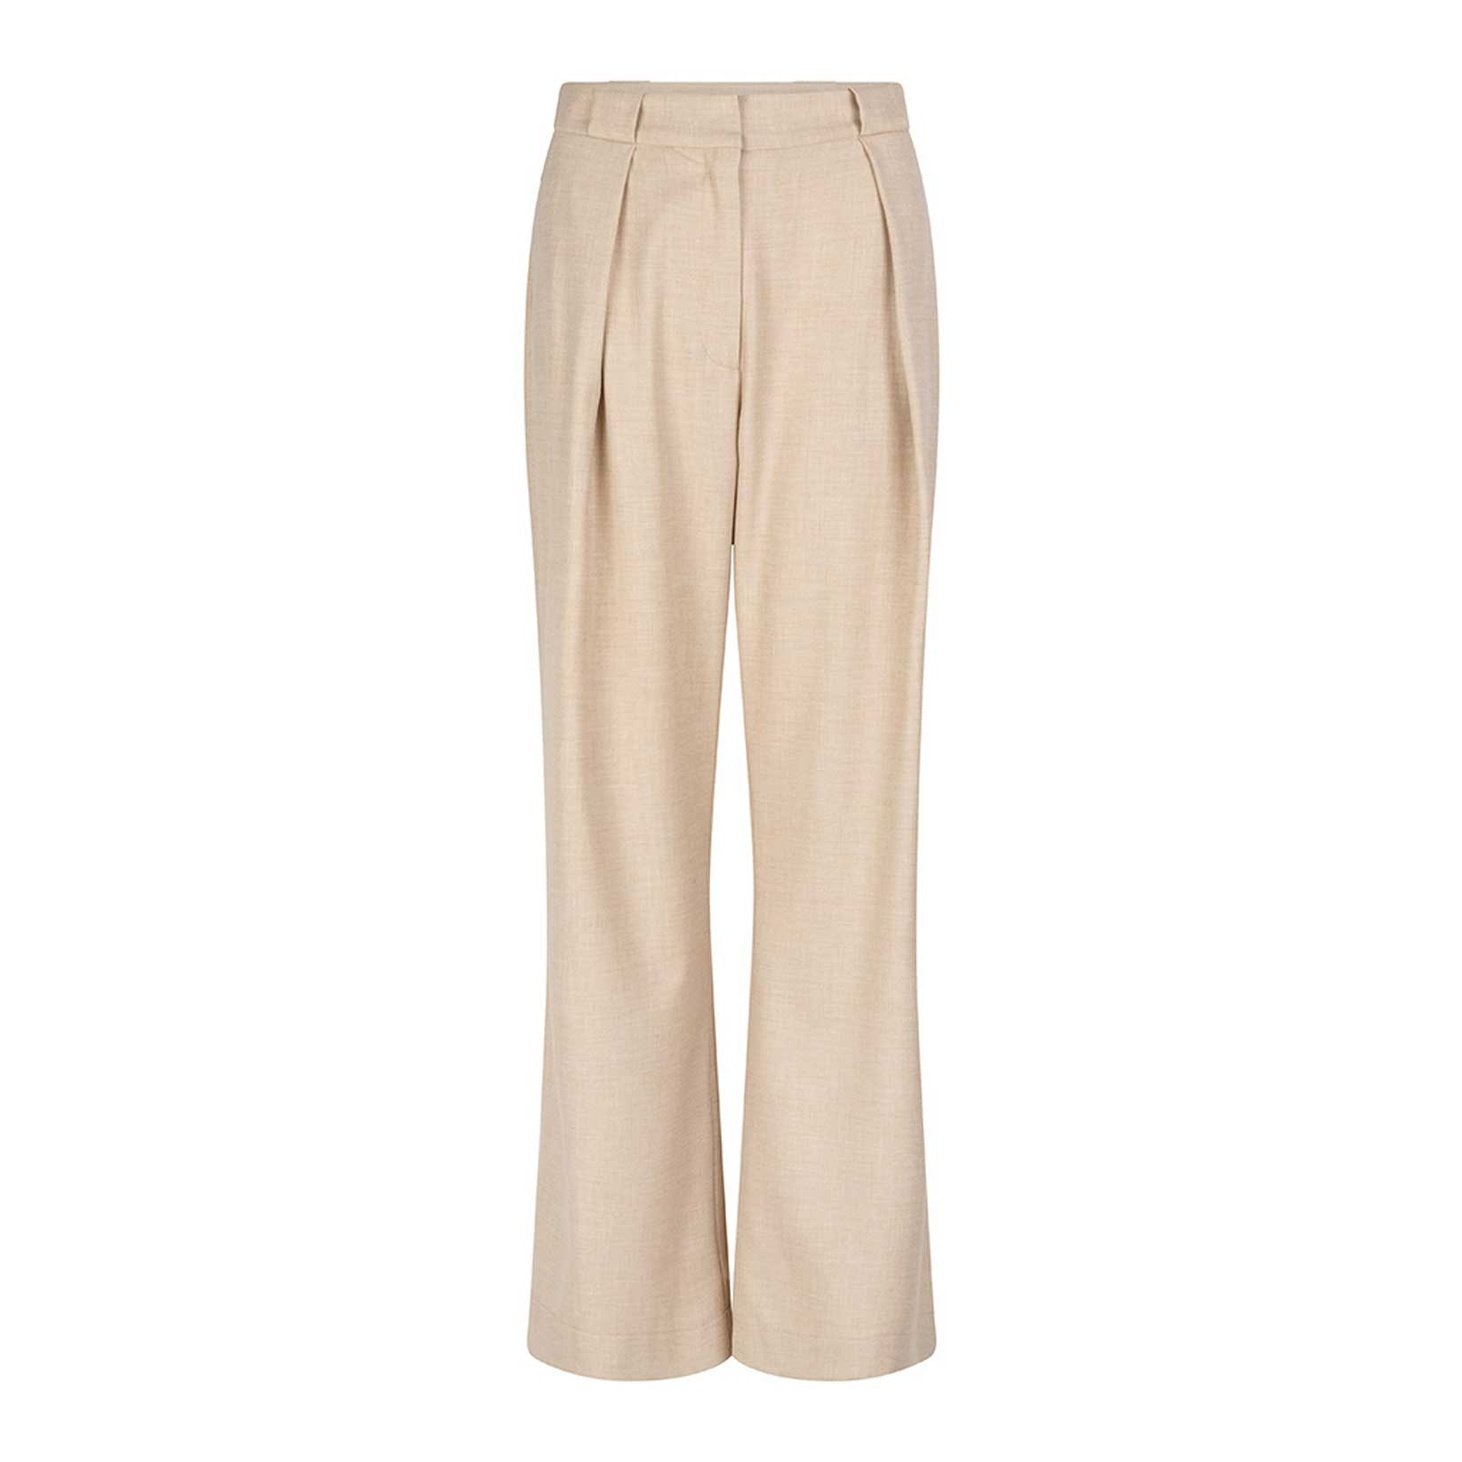 REELY TROUSERS